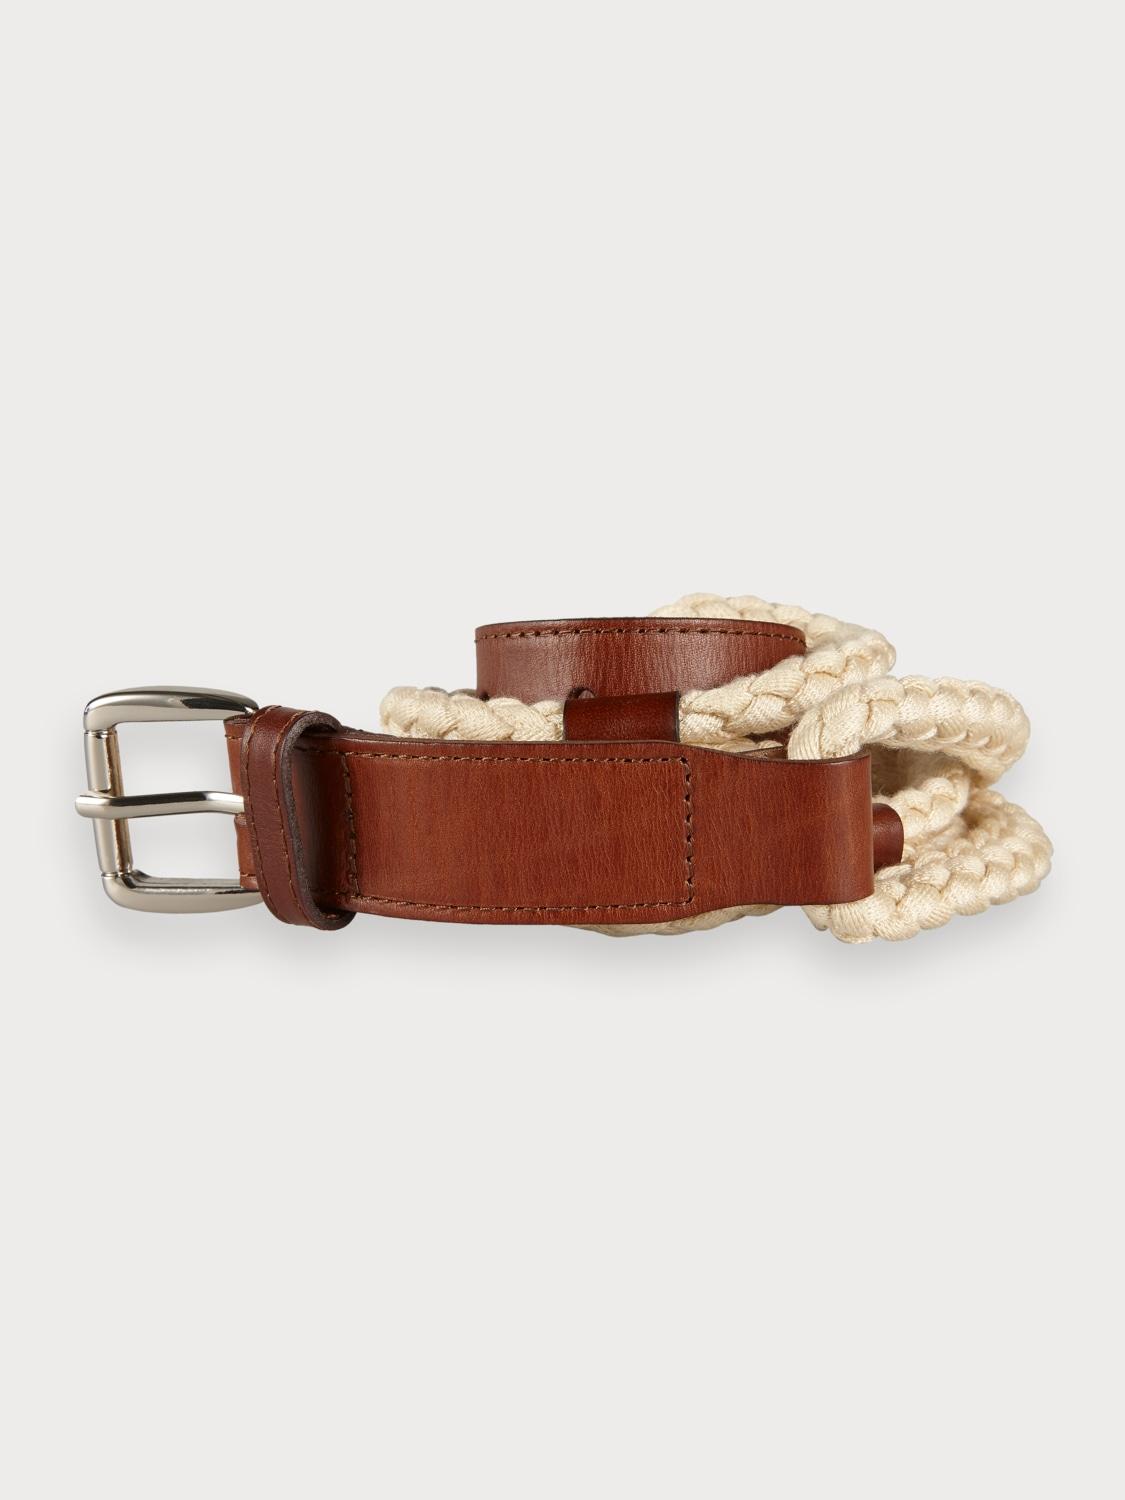 Scotch & Soda Rope & Leather Belt in Combo a (Brown) for Men - Lyst